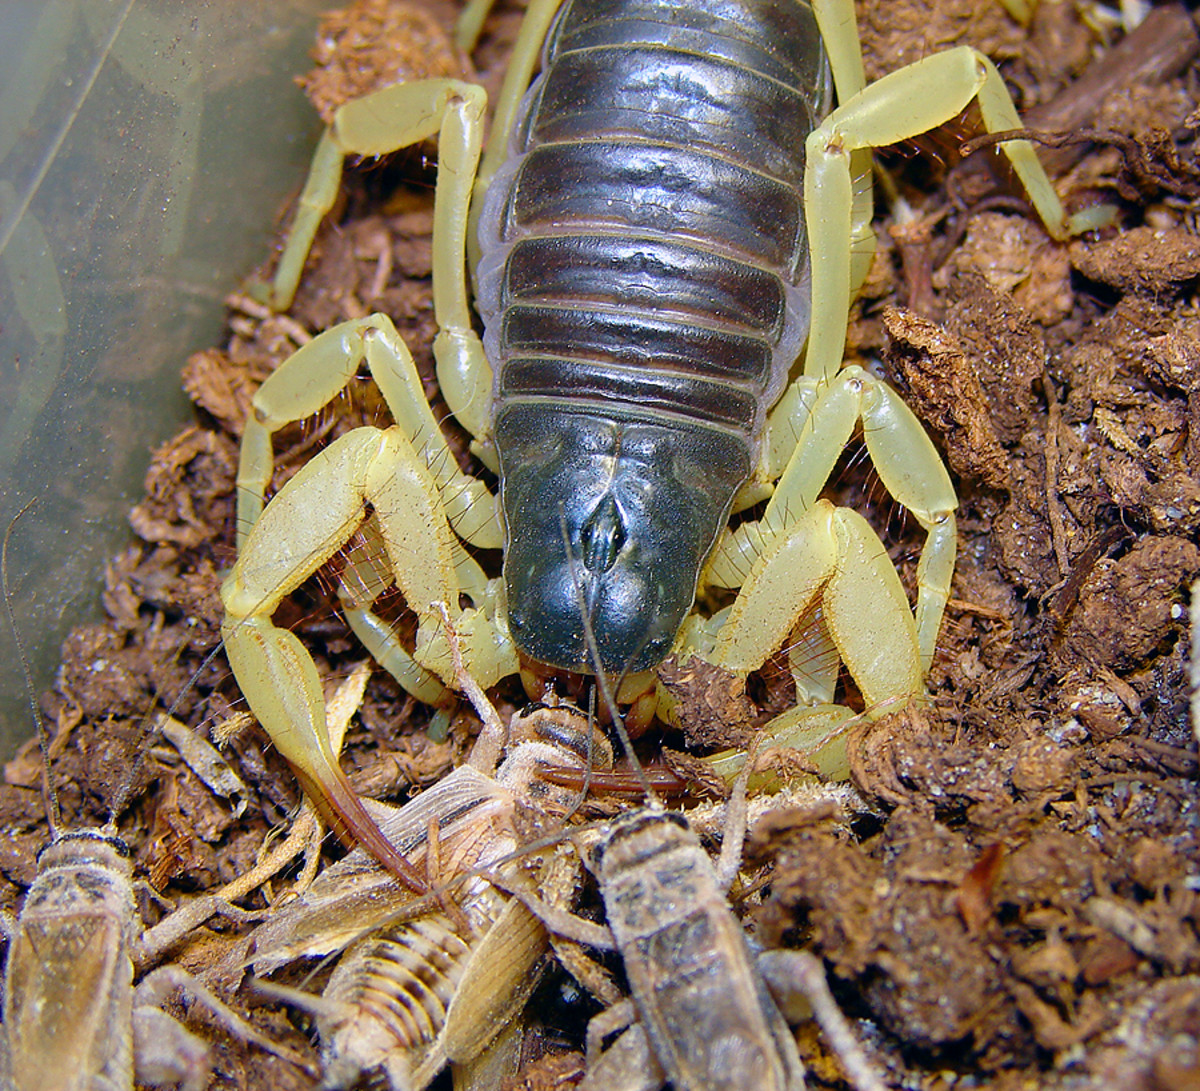 These crickets are no match for the dreaded scorpion.